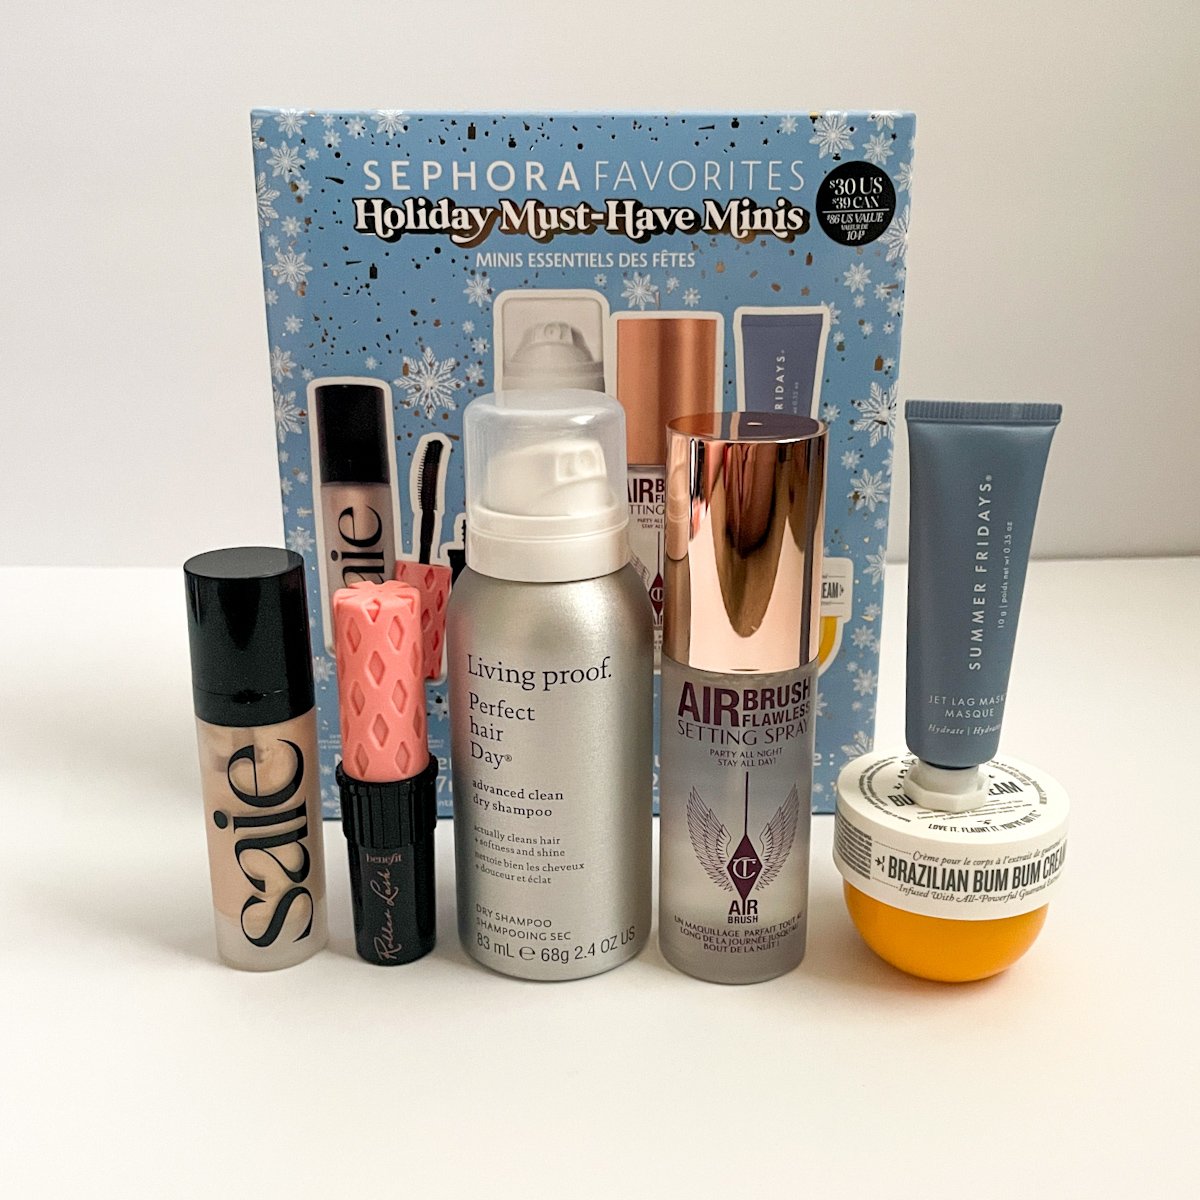 Sephora Favorites: Mini Holiday Must Haves Set Review